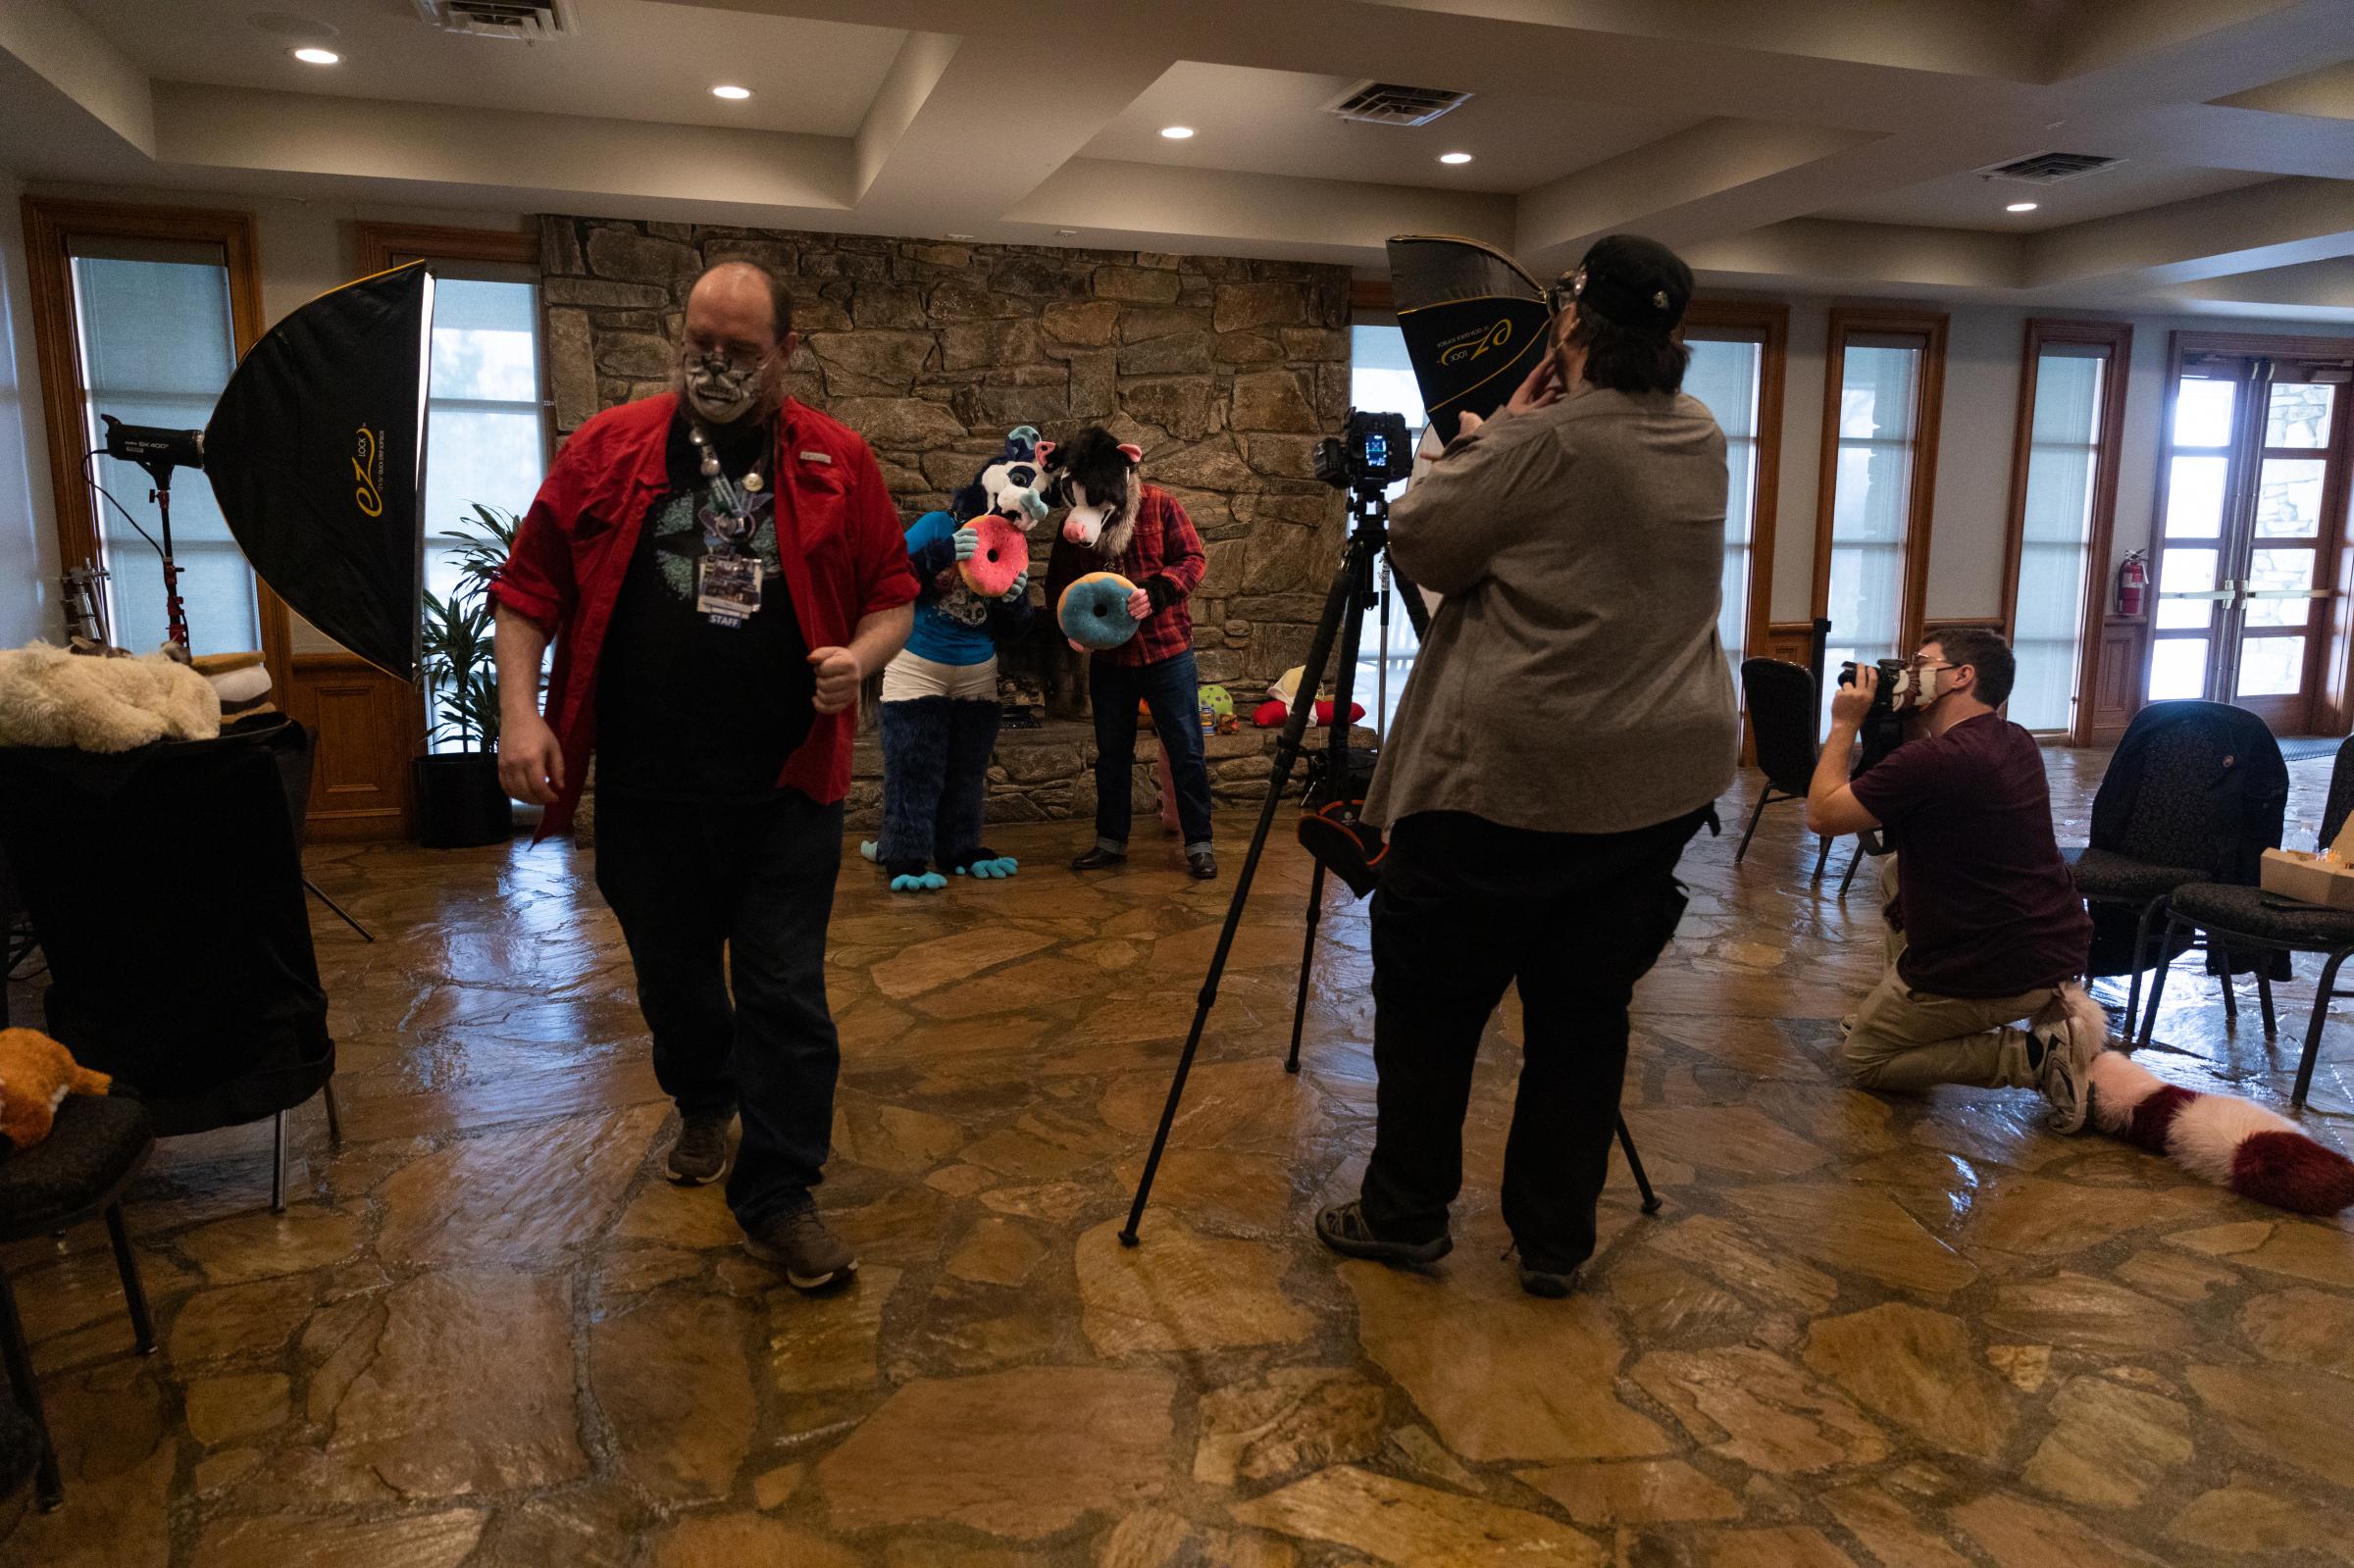 Furry Fandom - Attendees were able to have their photos taken for free.